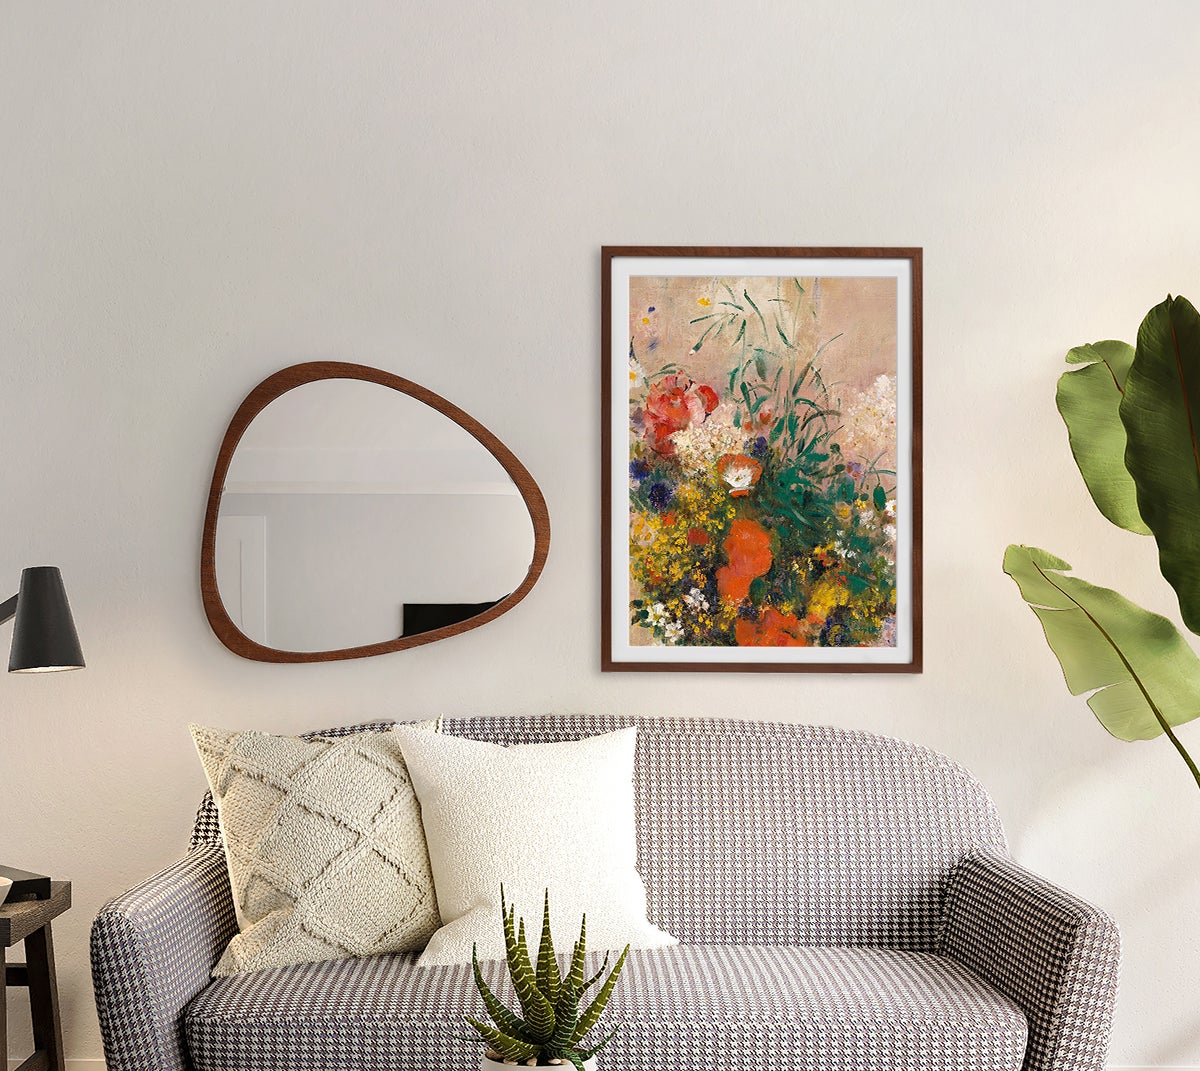 Large Artifact Uprising Gallery Frame featuring print of a coloful painting hung on wall next to organically shaped mirror